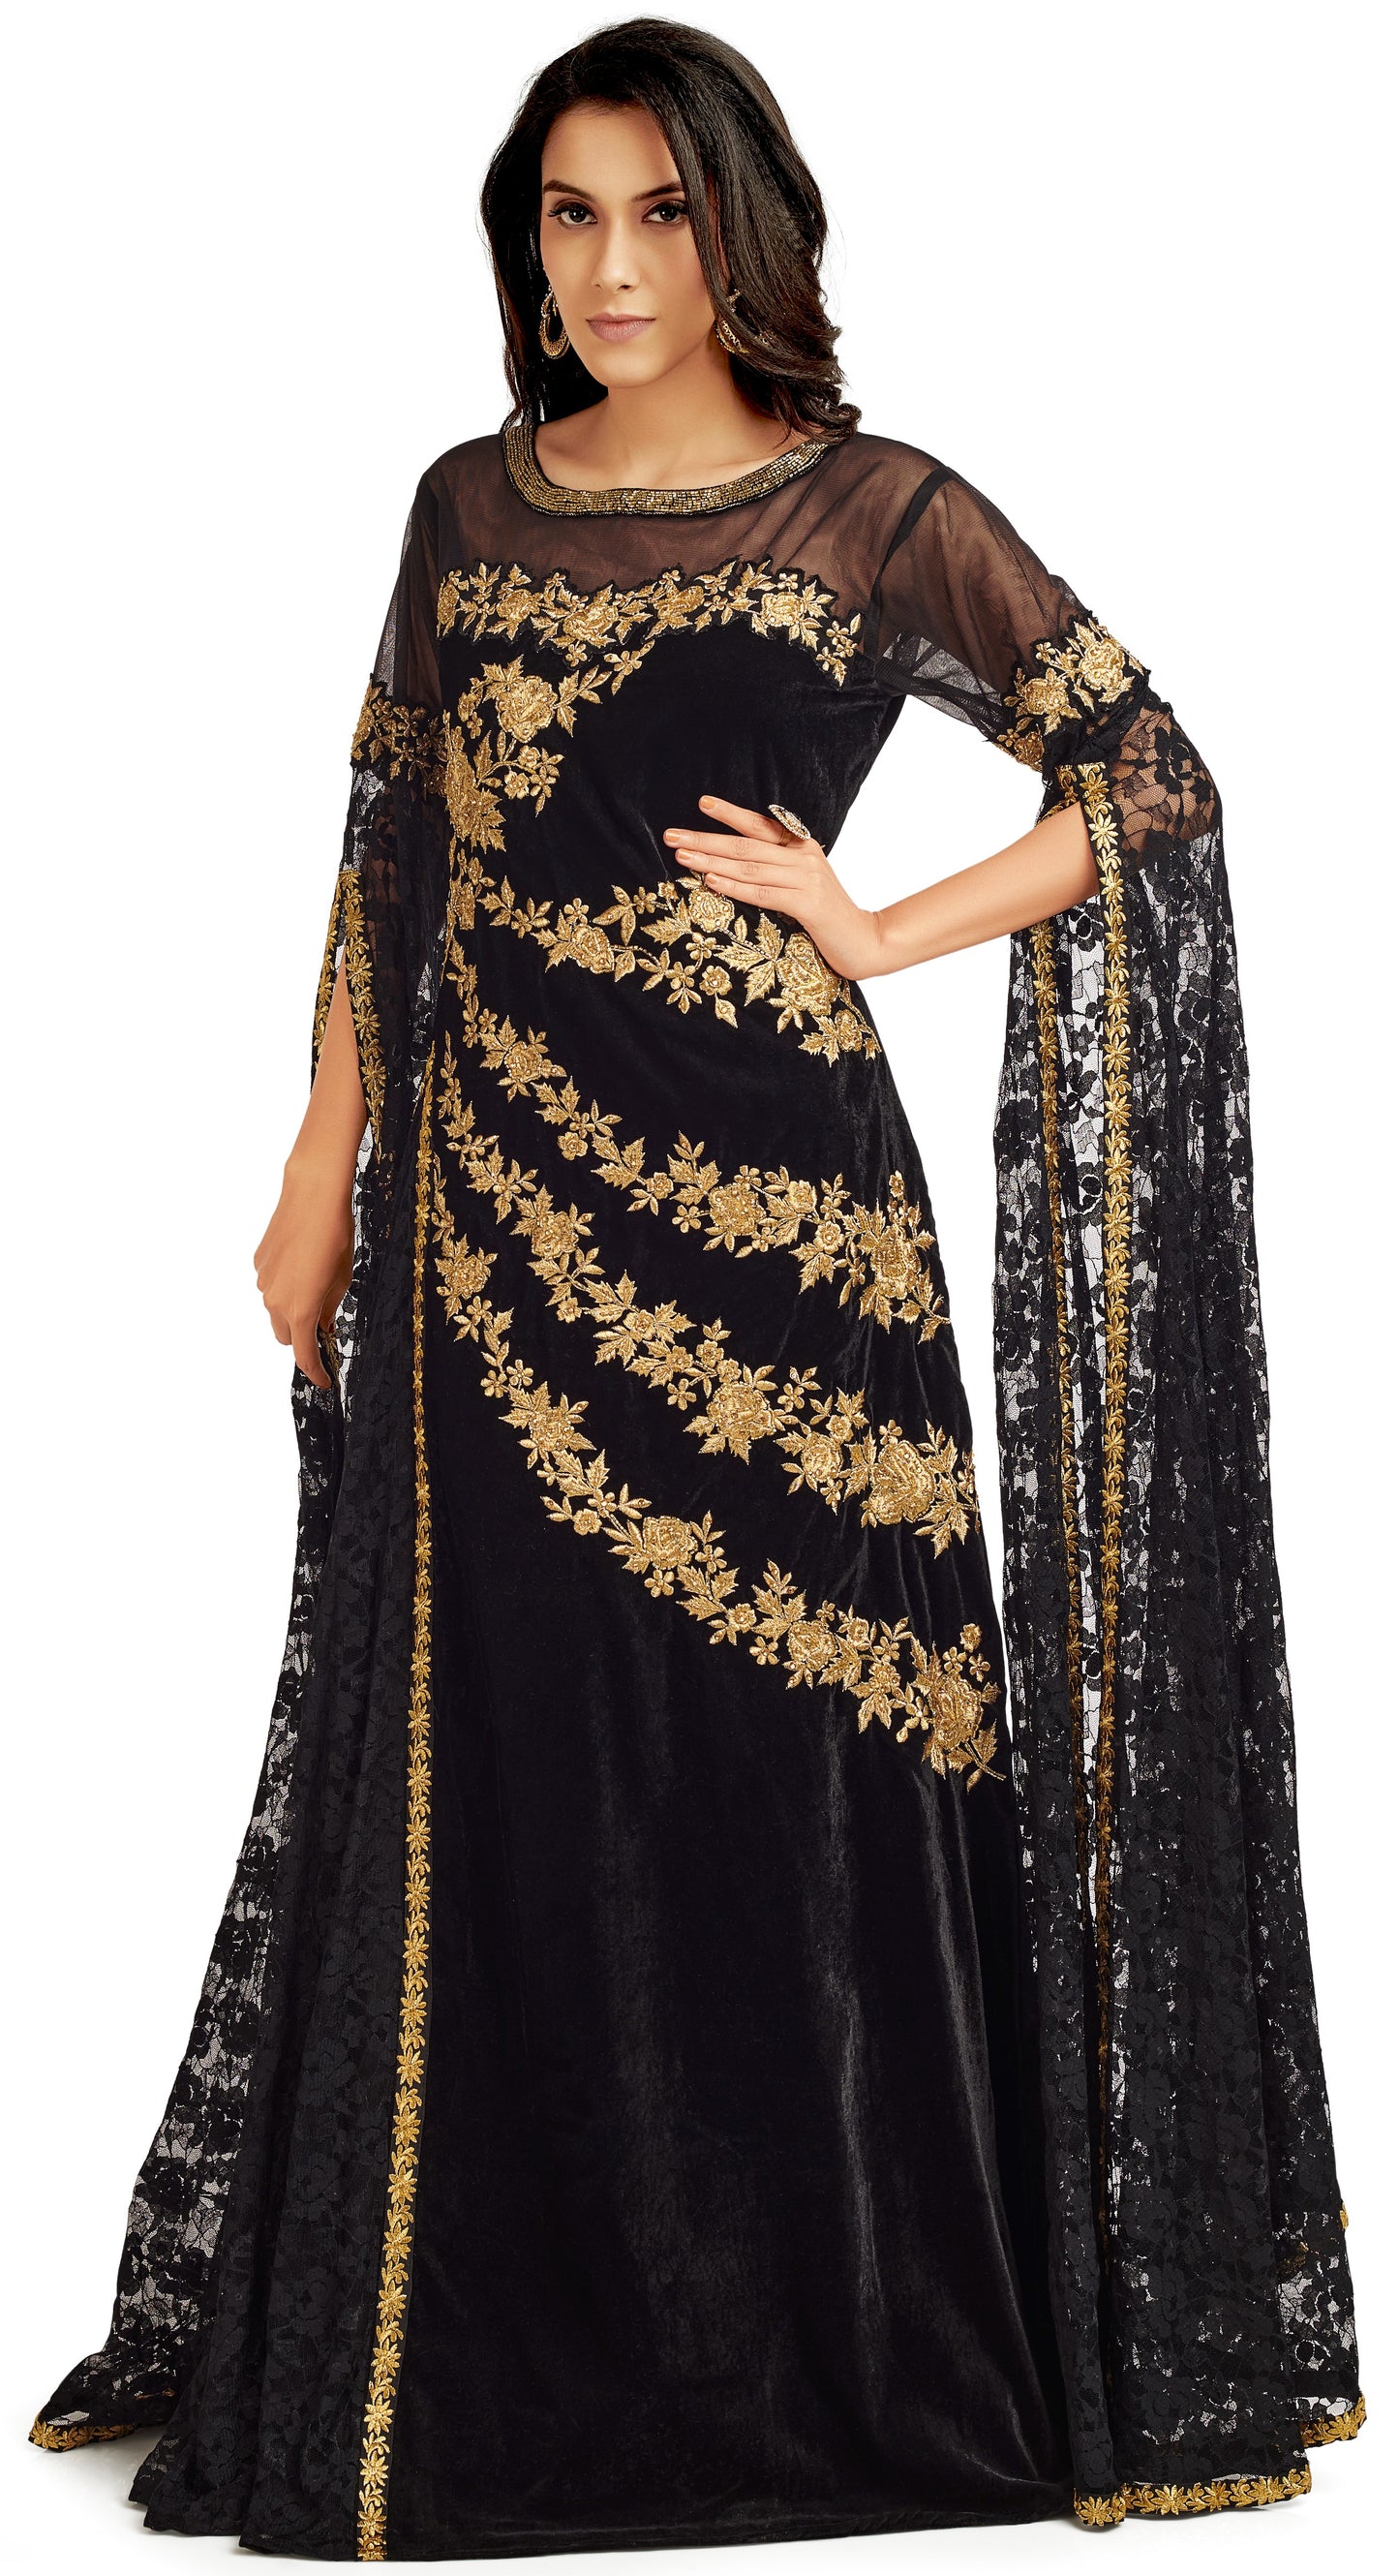 Load image into Gallery viewer, Black Velvet Party Gown with Long Sleeve - Maxim Creation
